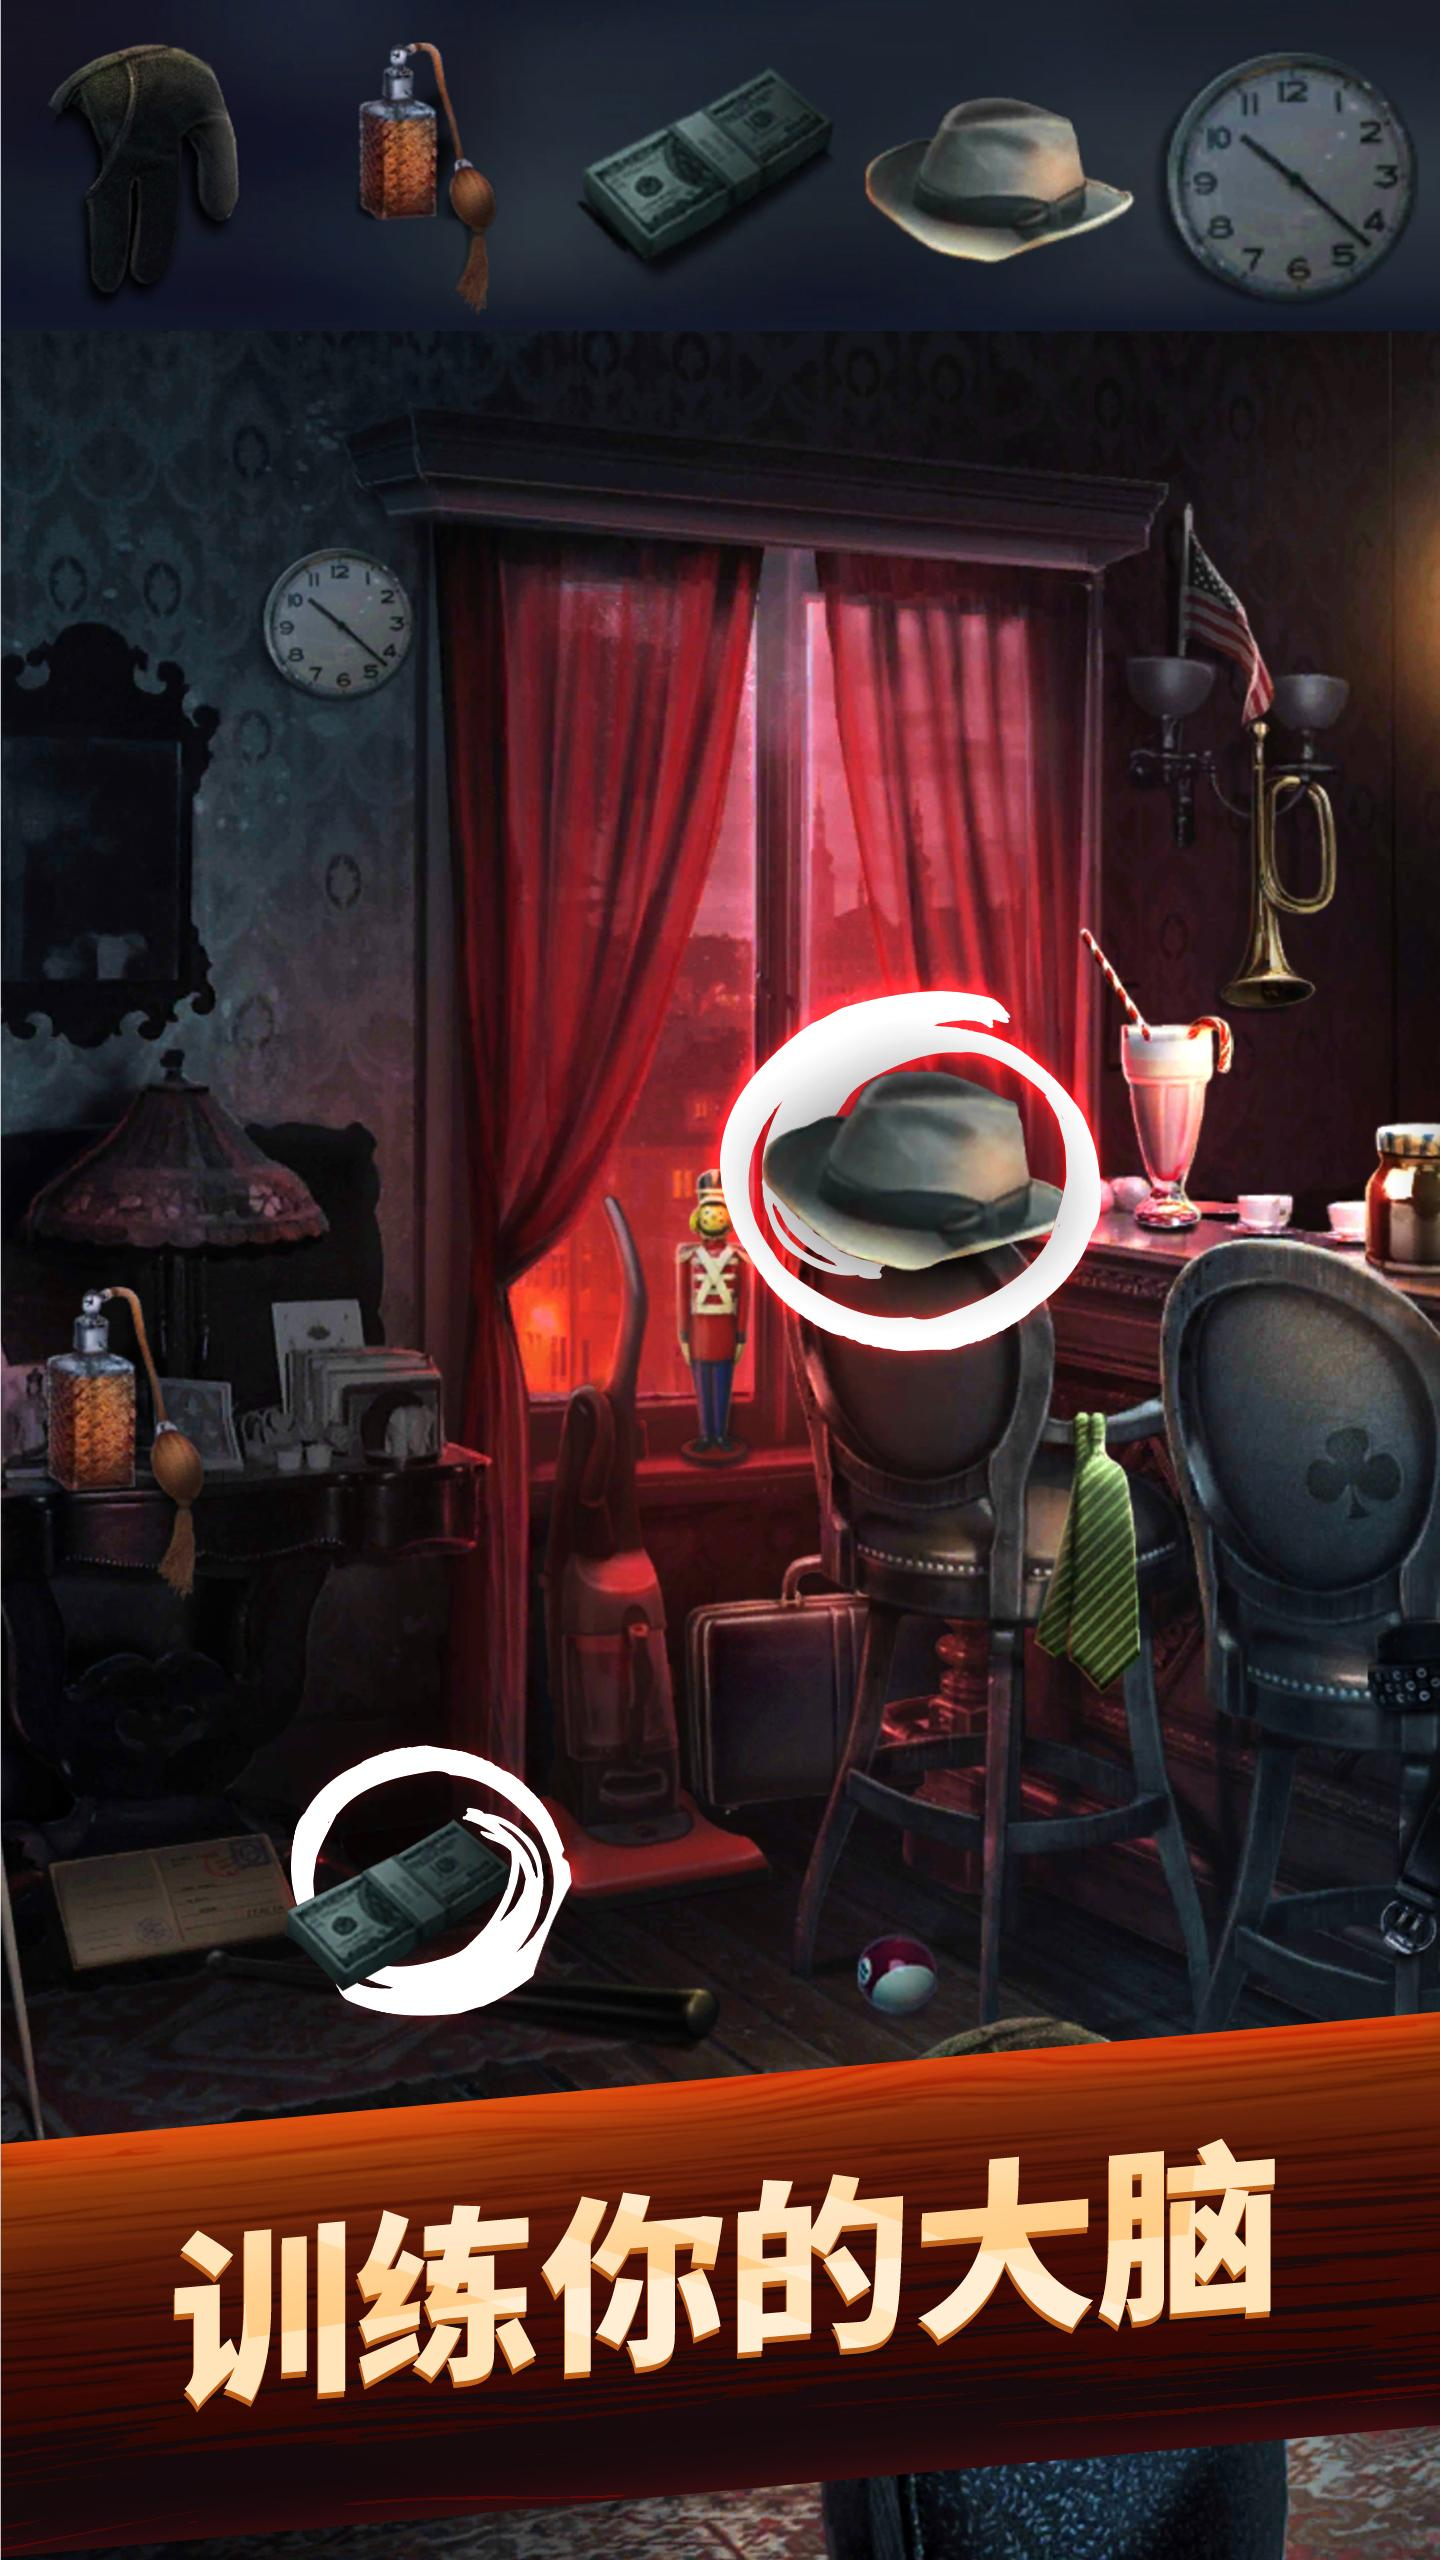 Hidden Objects: Find items(Unlimited Coins)